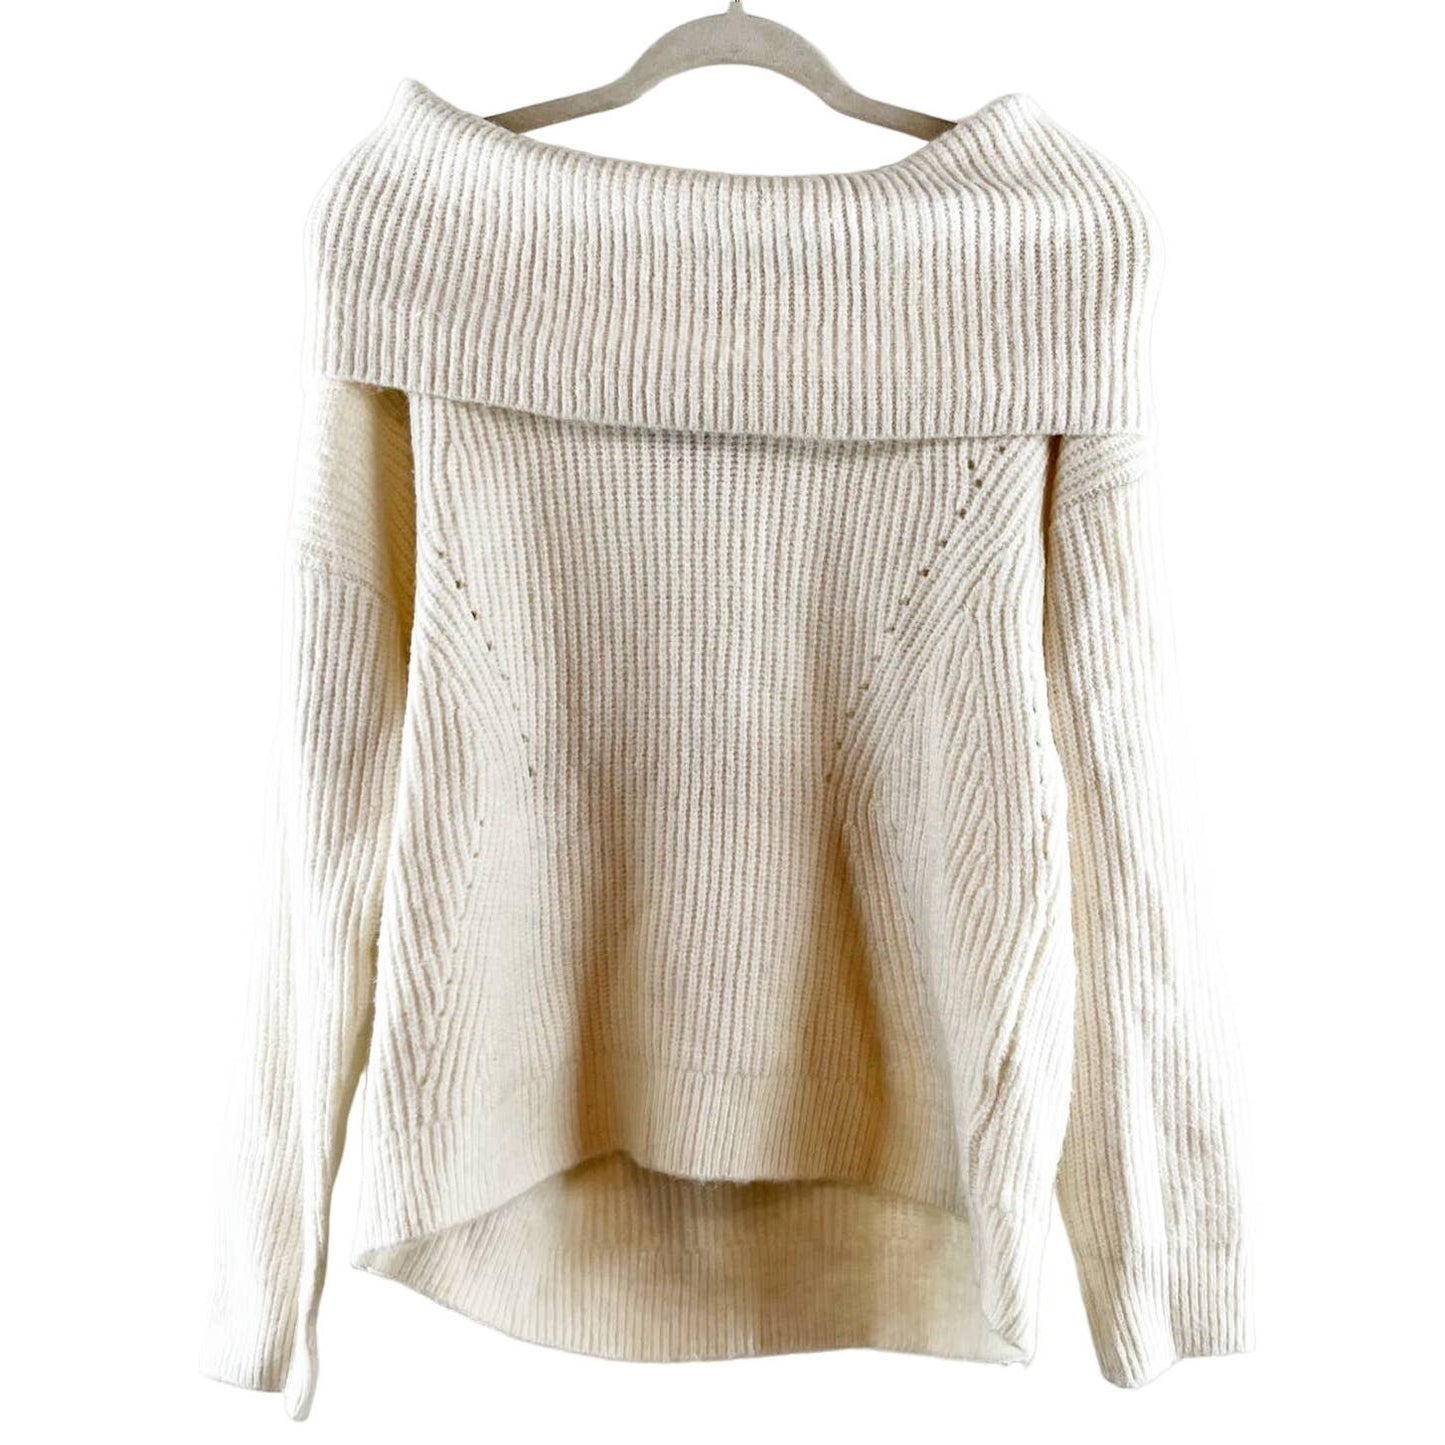 Stitches & Stripes Juliette Chunky Pullover Sweater Ivory Large NWT